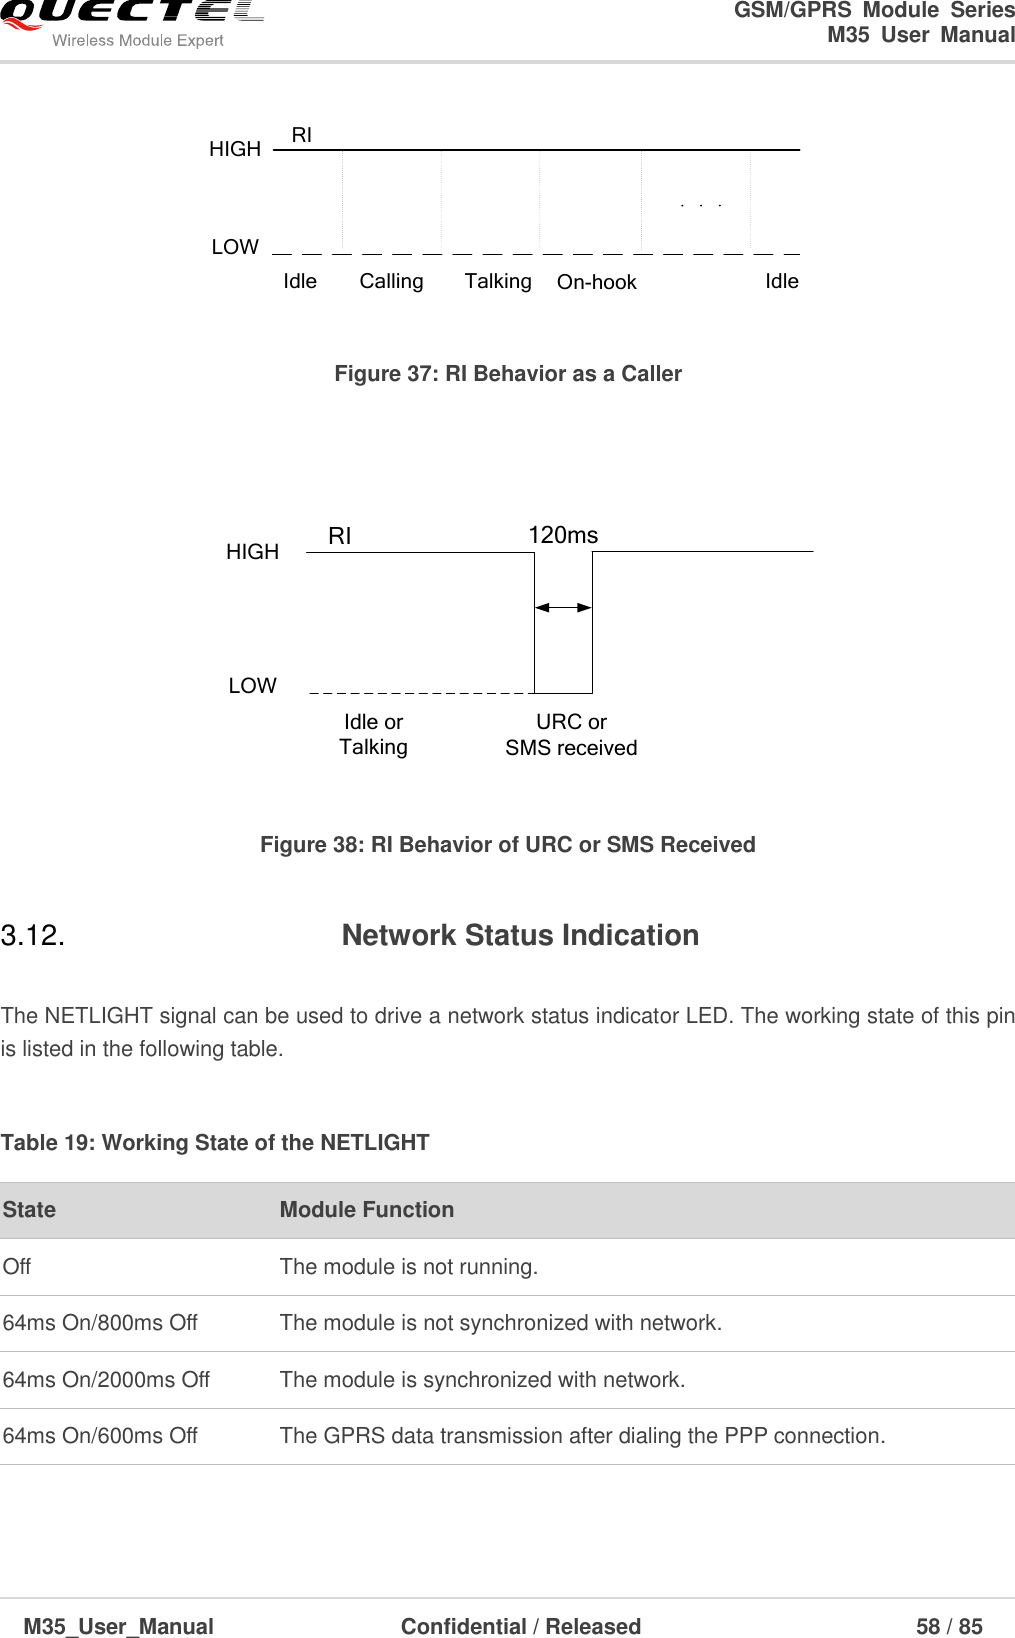                                                                              GSM/GPRS  Module  Series                                                                 M35  User  Manual  M35_User_Manual                                  Confidential / Released                             58 / 85    RIIdle Calling On-hookTalkingHIGHLOWIdle Figure 37: RI Behavior as a Caller  RIIdle or Talking URC or                   SMS received HIGHLOW120ms Figure 38: RI Behavior of URC or SMS Received 3.12.  Network Status Indication  The NETLIGHT signal can be used to drive a network status indicator LED. The working state of this pin is listed in the following table.  Table 19: Working State of the NETLIGHT   State Module Function Off The module is not running. 64ms On/800ms Off The module is not synchronized with network. 64ms On/2000ms Off The module is synchronized with network. 64ms On/600ms Off The GPRS data transmission after dialing the PPP connection. 